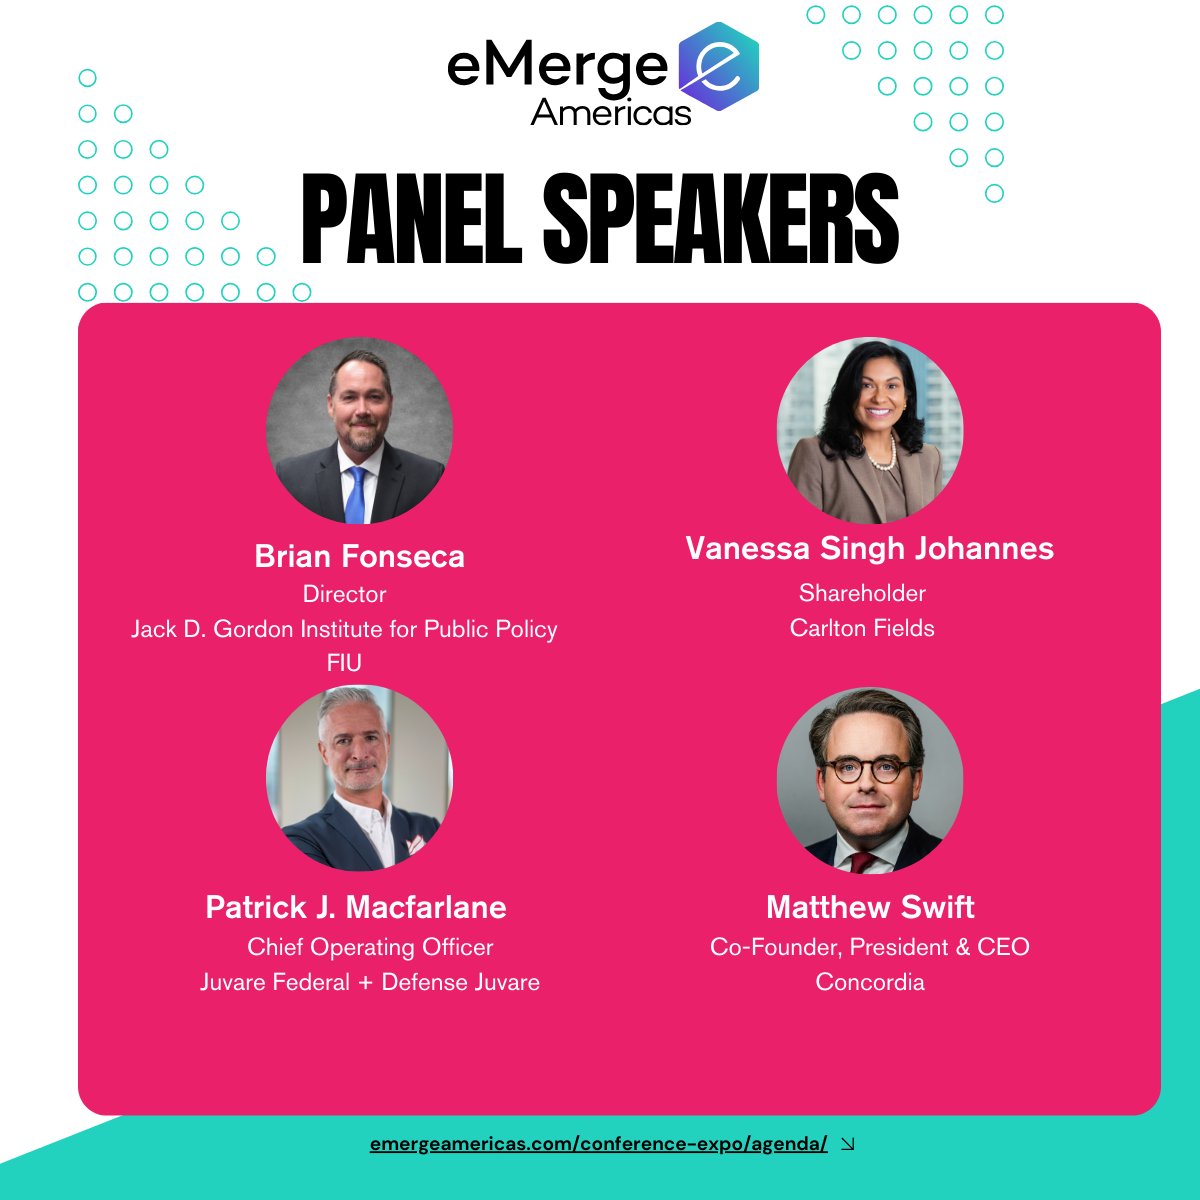 We are excited to be representing @FIU at @eMergeAmericas on Thursday, April 18th!

#eMergeAmericas attendees, join us for our panels featuring @BrianPFonseca and @LelandLazarus!

Full agenda available! emergeamericas.com/conference-exp… #Defense #Security #AI #JGI